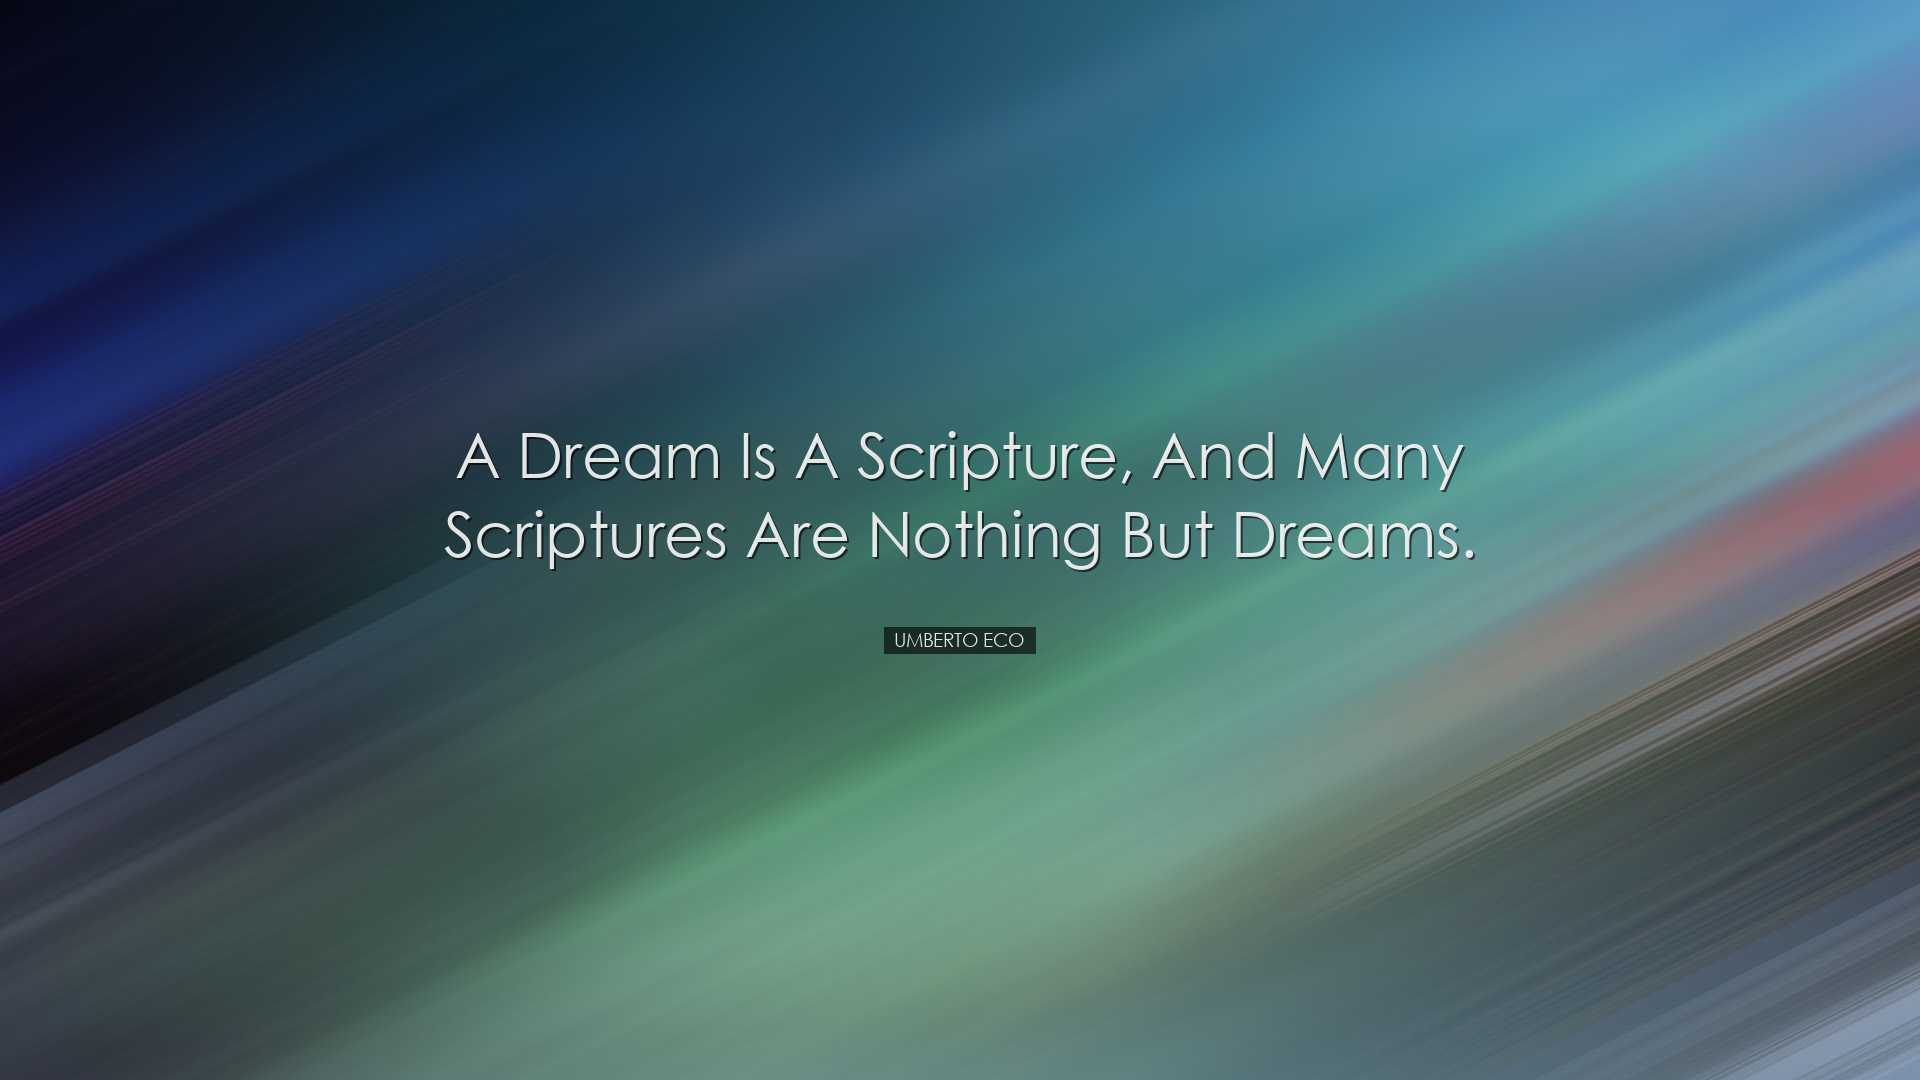 A dream is a scripture, and many scriptures are nothing but dreams